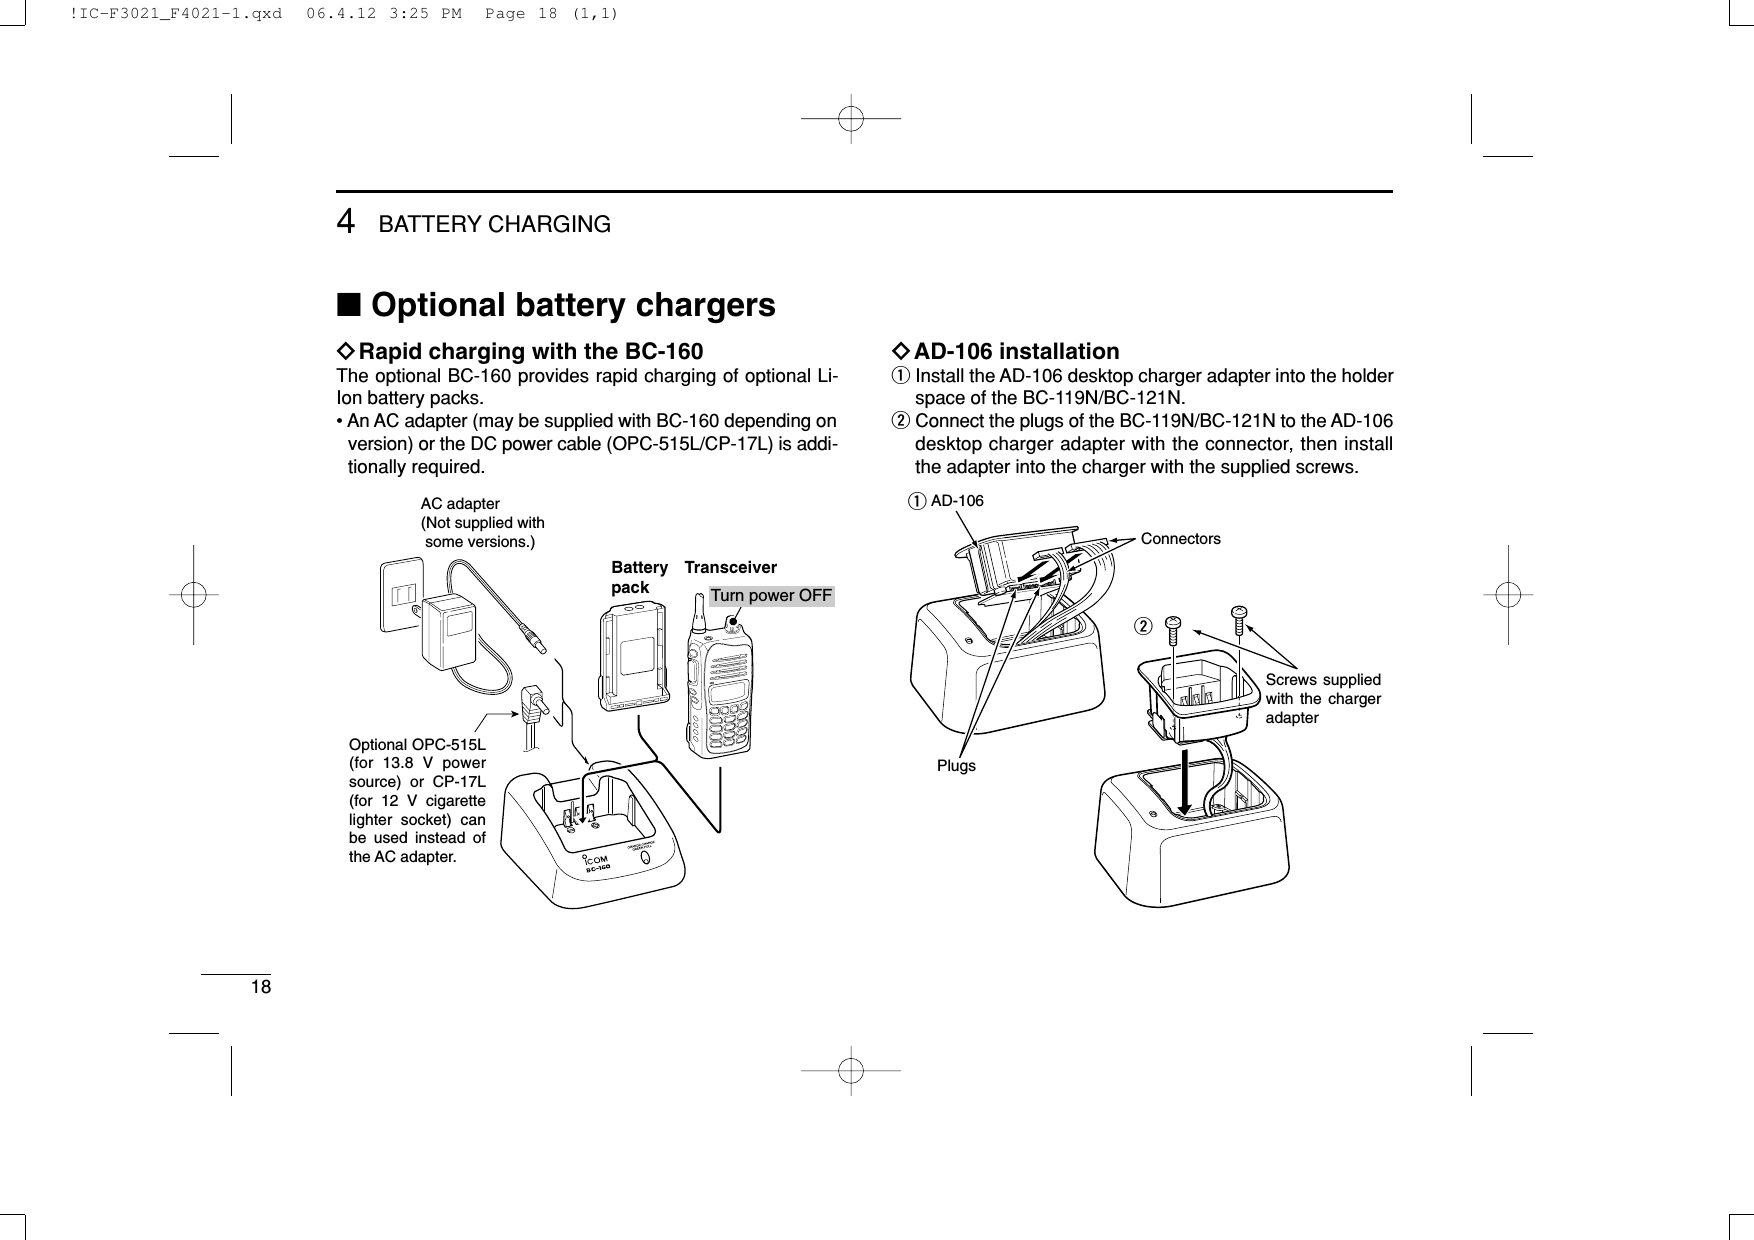 184BATTERY CHARGING■Optional battery chargersïRapid charging with the BC-160The optional BC-160 provides rapid charging of optional Li-Ion battery packs.• An AC adapter (may be supplied with BC-160 depending onversion) or the DC power cable (OPC-515L/CP-17L) is addi-tionally required.ïAD-106 installationqInstall the AD-106 desktop charger adapter into the holderspace of the BC-119N/BC-121N.wConnect the plugs of the BC-119N/BC-121N to the AD-106desktop charger adapter with the connector, then installthe adapter into the charger with the supplied screws.Screws supplied with the charger adapterAD-106ConnectorsPlugsqwAC adapter(Not supplied with  some versions.)Optional OPC-515L (for 13.8 V power source) or CP-17L (for 12 V cigarette lighter socket) can be used instead of the AC adapter.TransceiverBatterypack Turn power OFF!IC-F3021_F4021-1.qxd  06.4.12 3:25 PM  Page 18 (1,1)